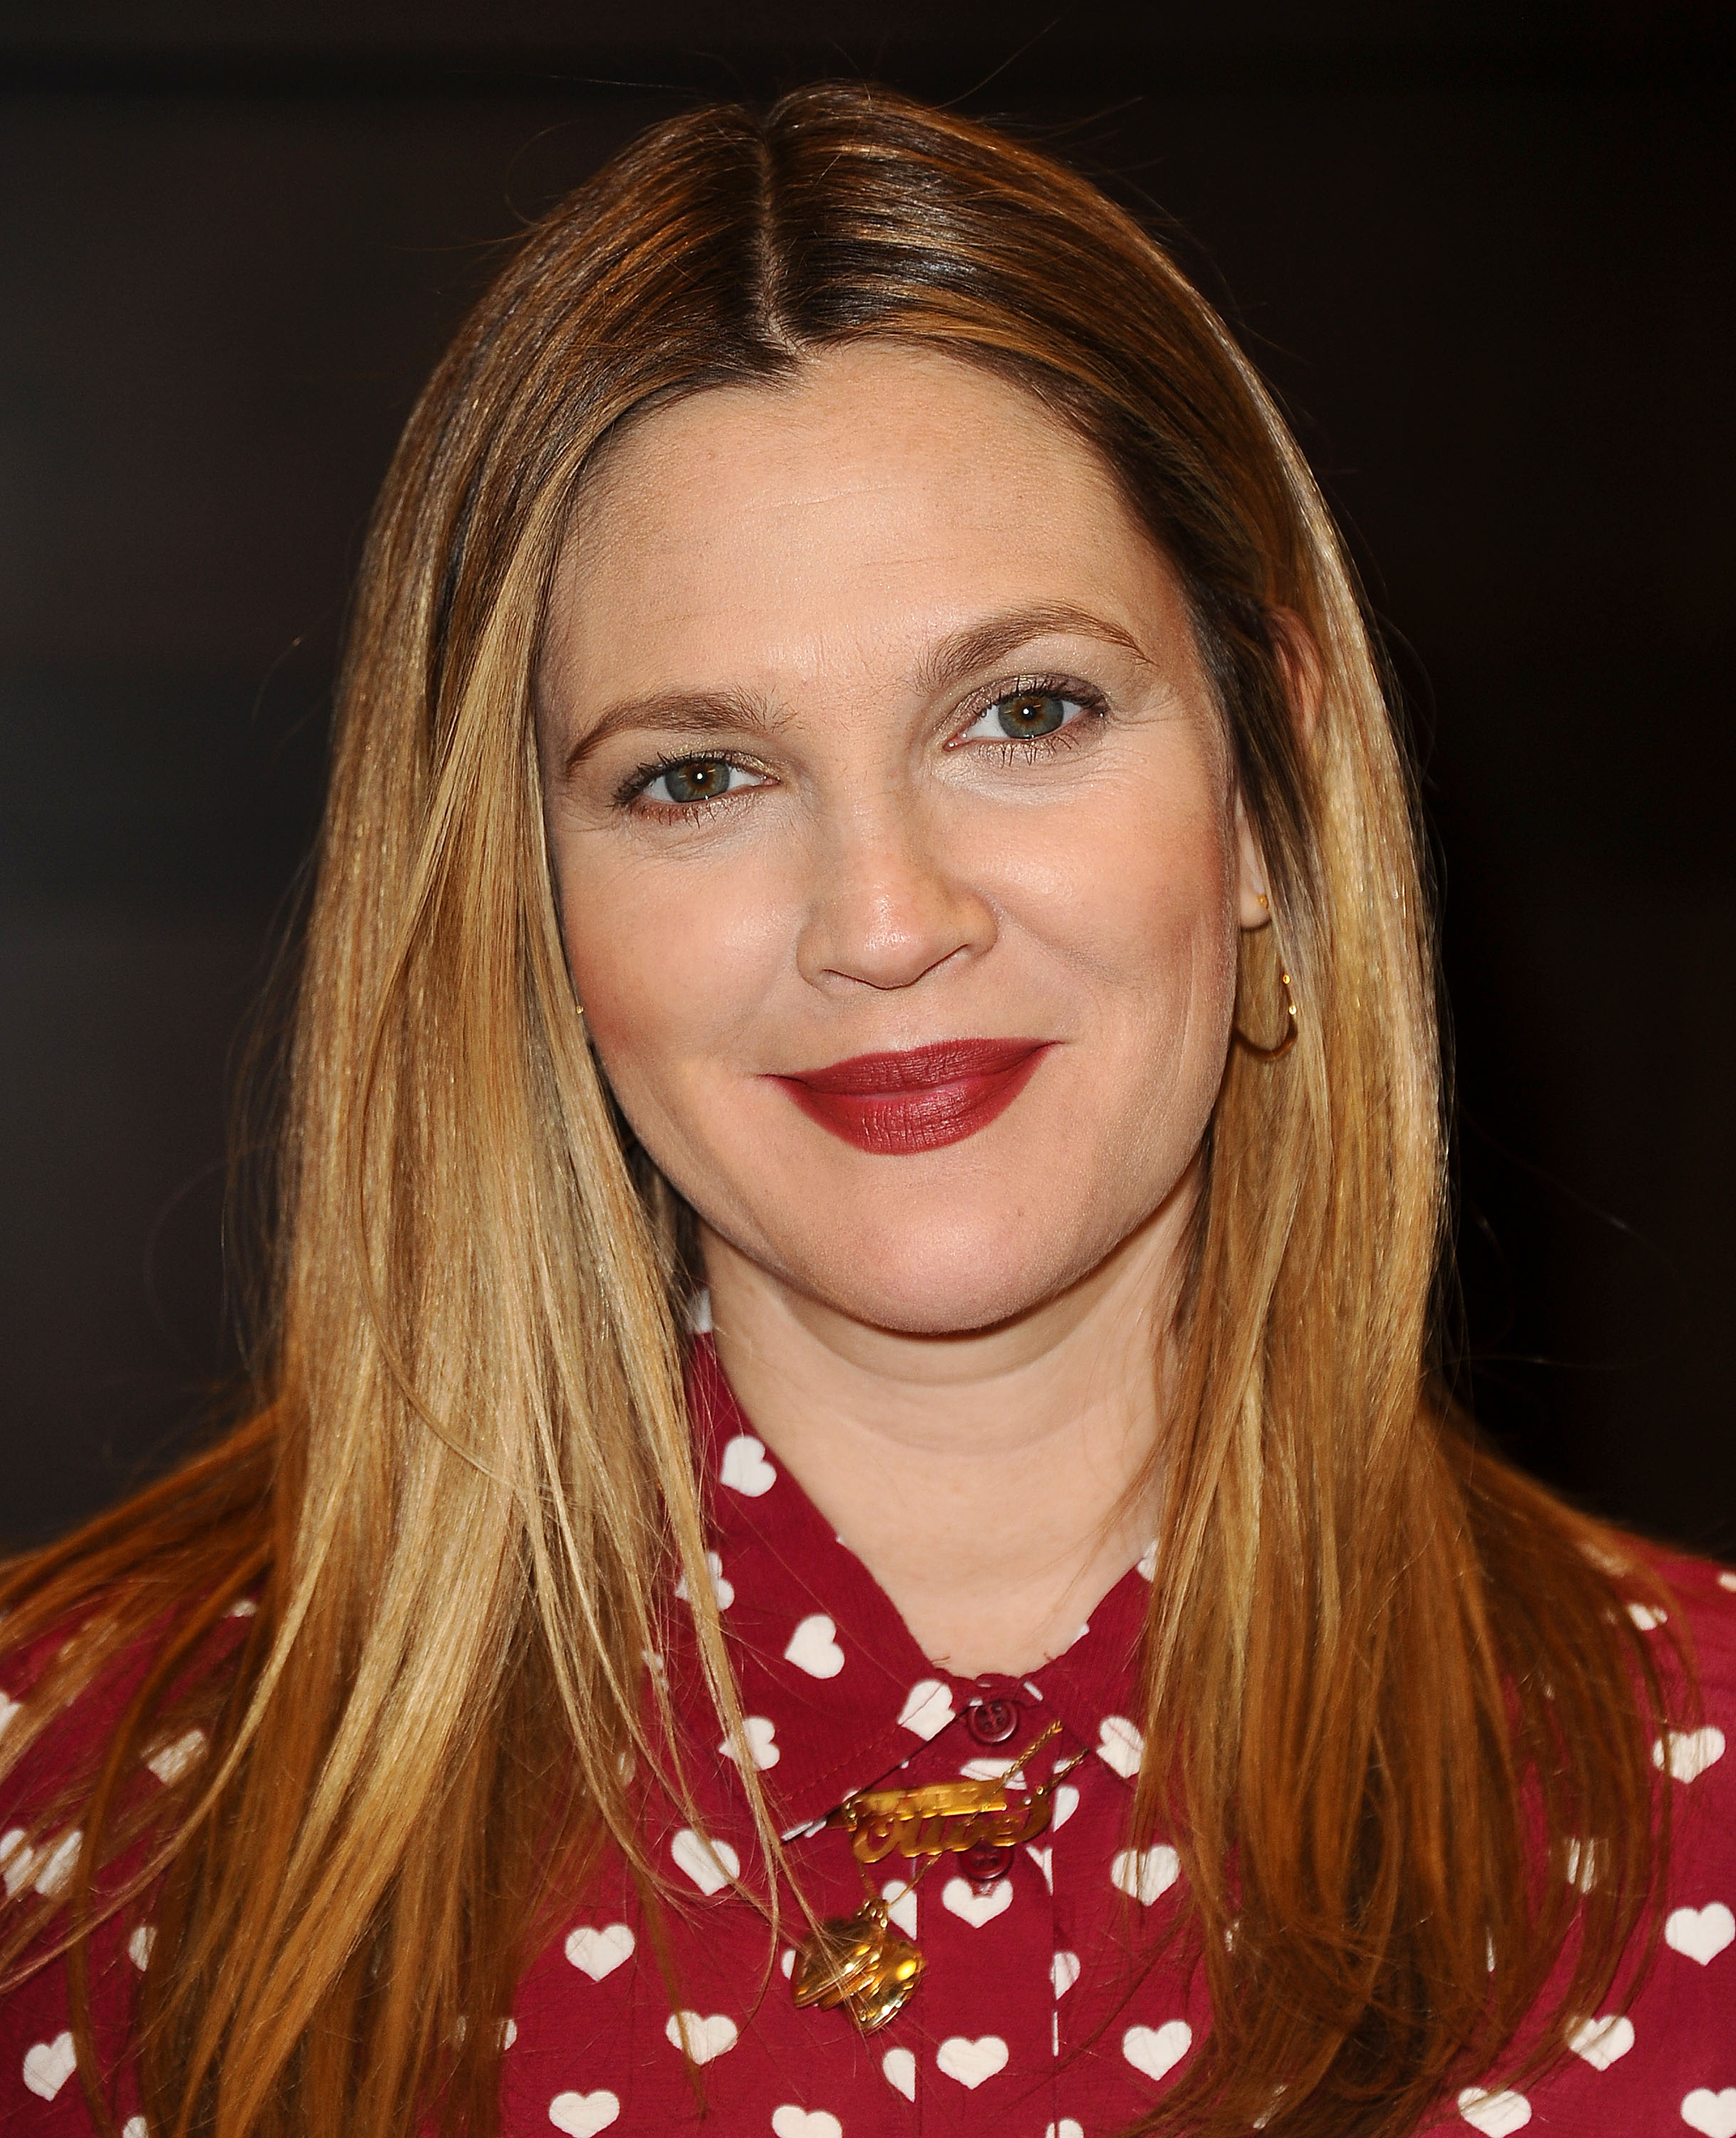 Drew Barrymore on January 15, 2014 in Los Angeles, California. | Source: Getty Images